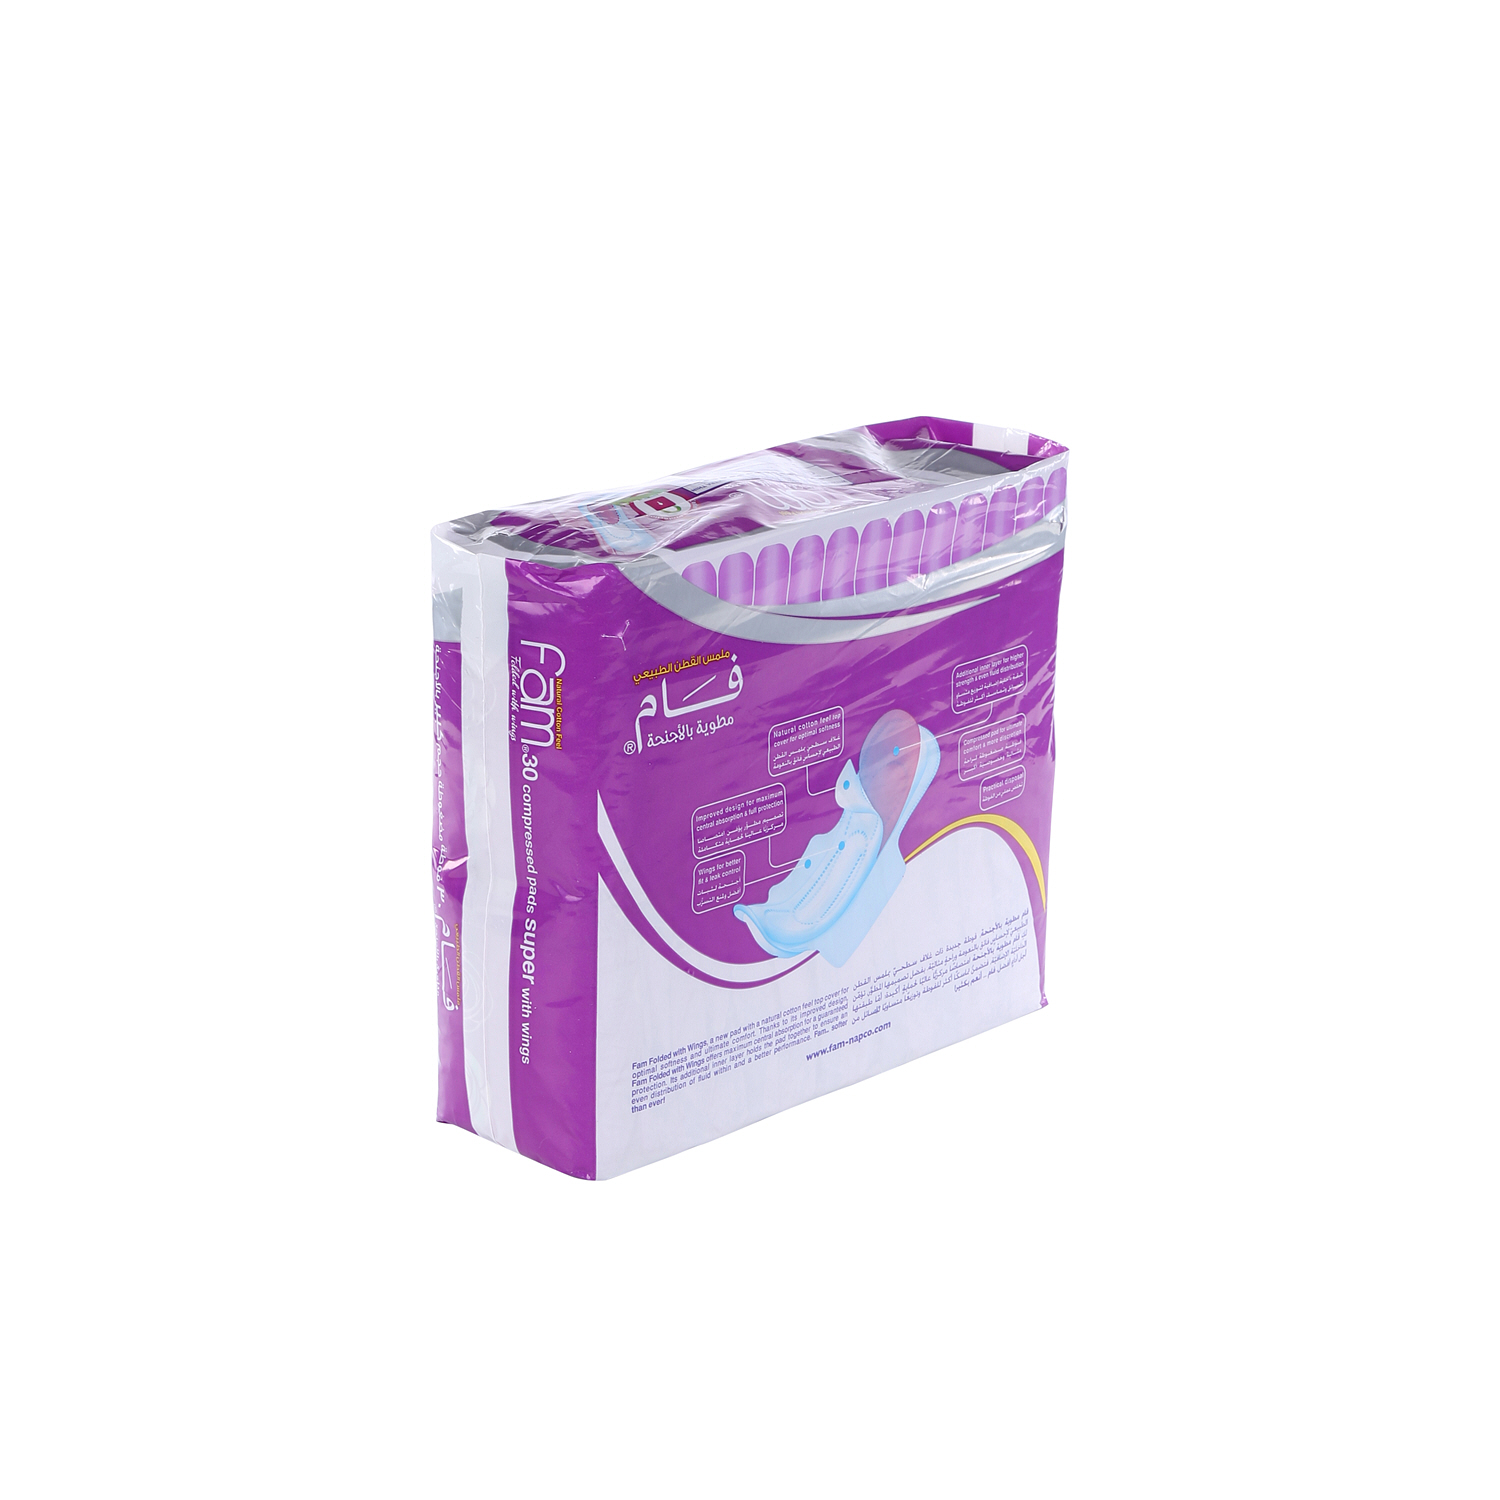 Fam Sanitary Pads Maxi Folded With Wings Super 30 Pads